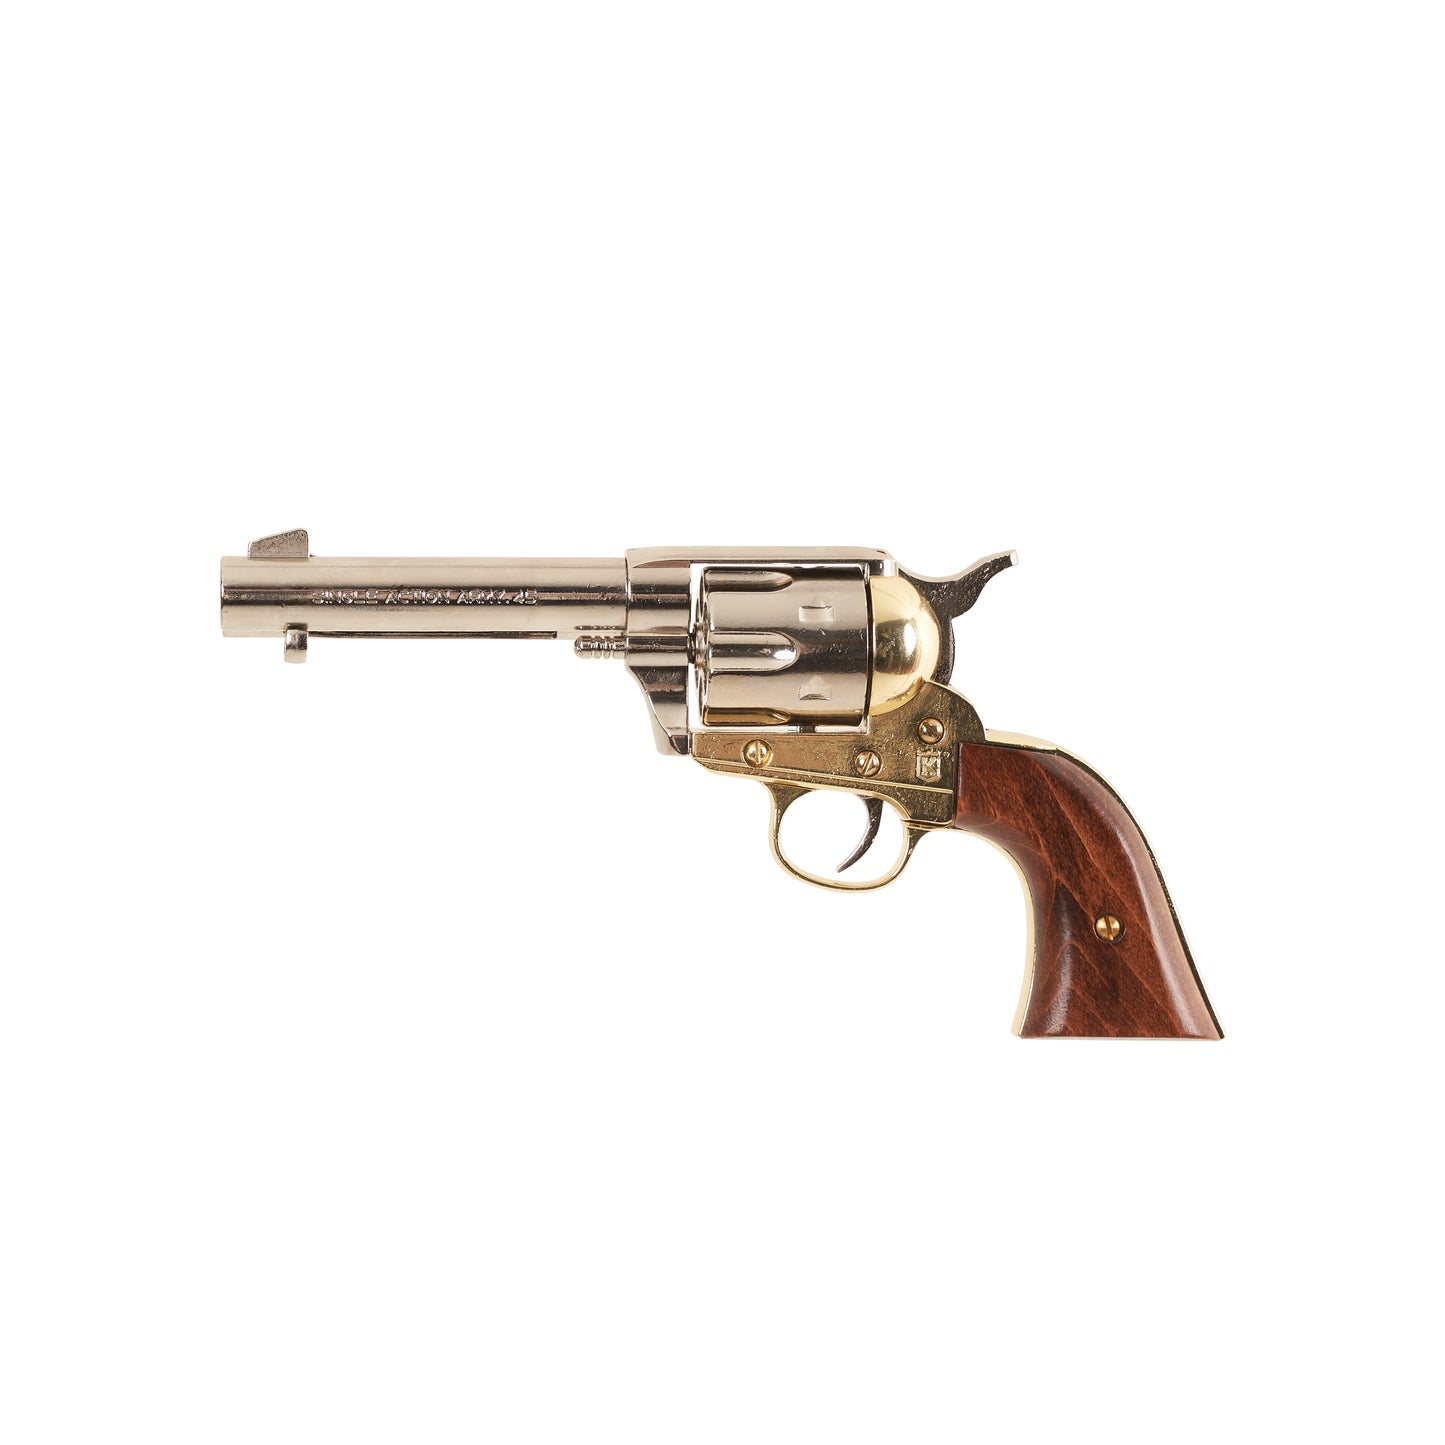 Left side view of polished nickel Non-Firing 1873 Fast Draw Revovler with brass trigger guard and wood grip.